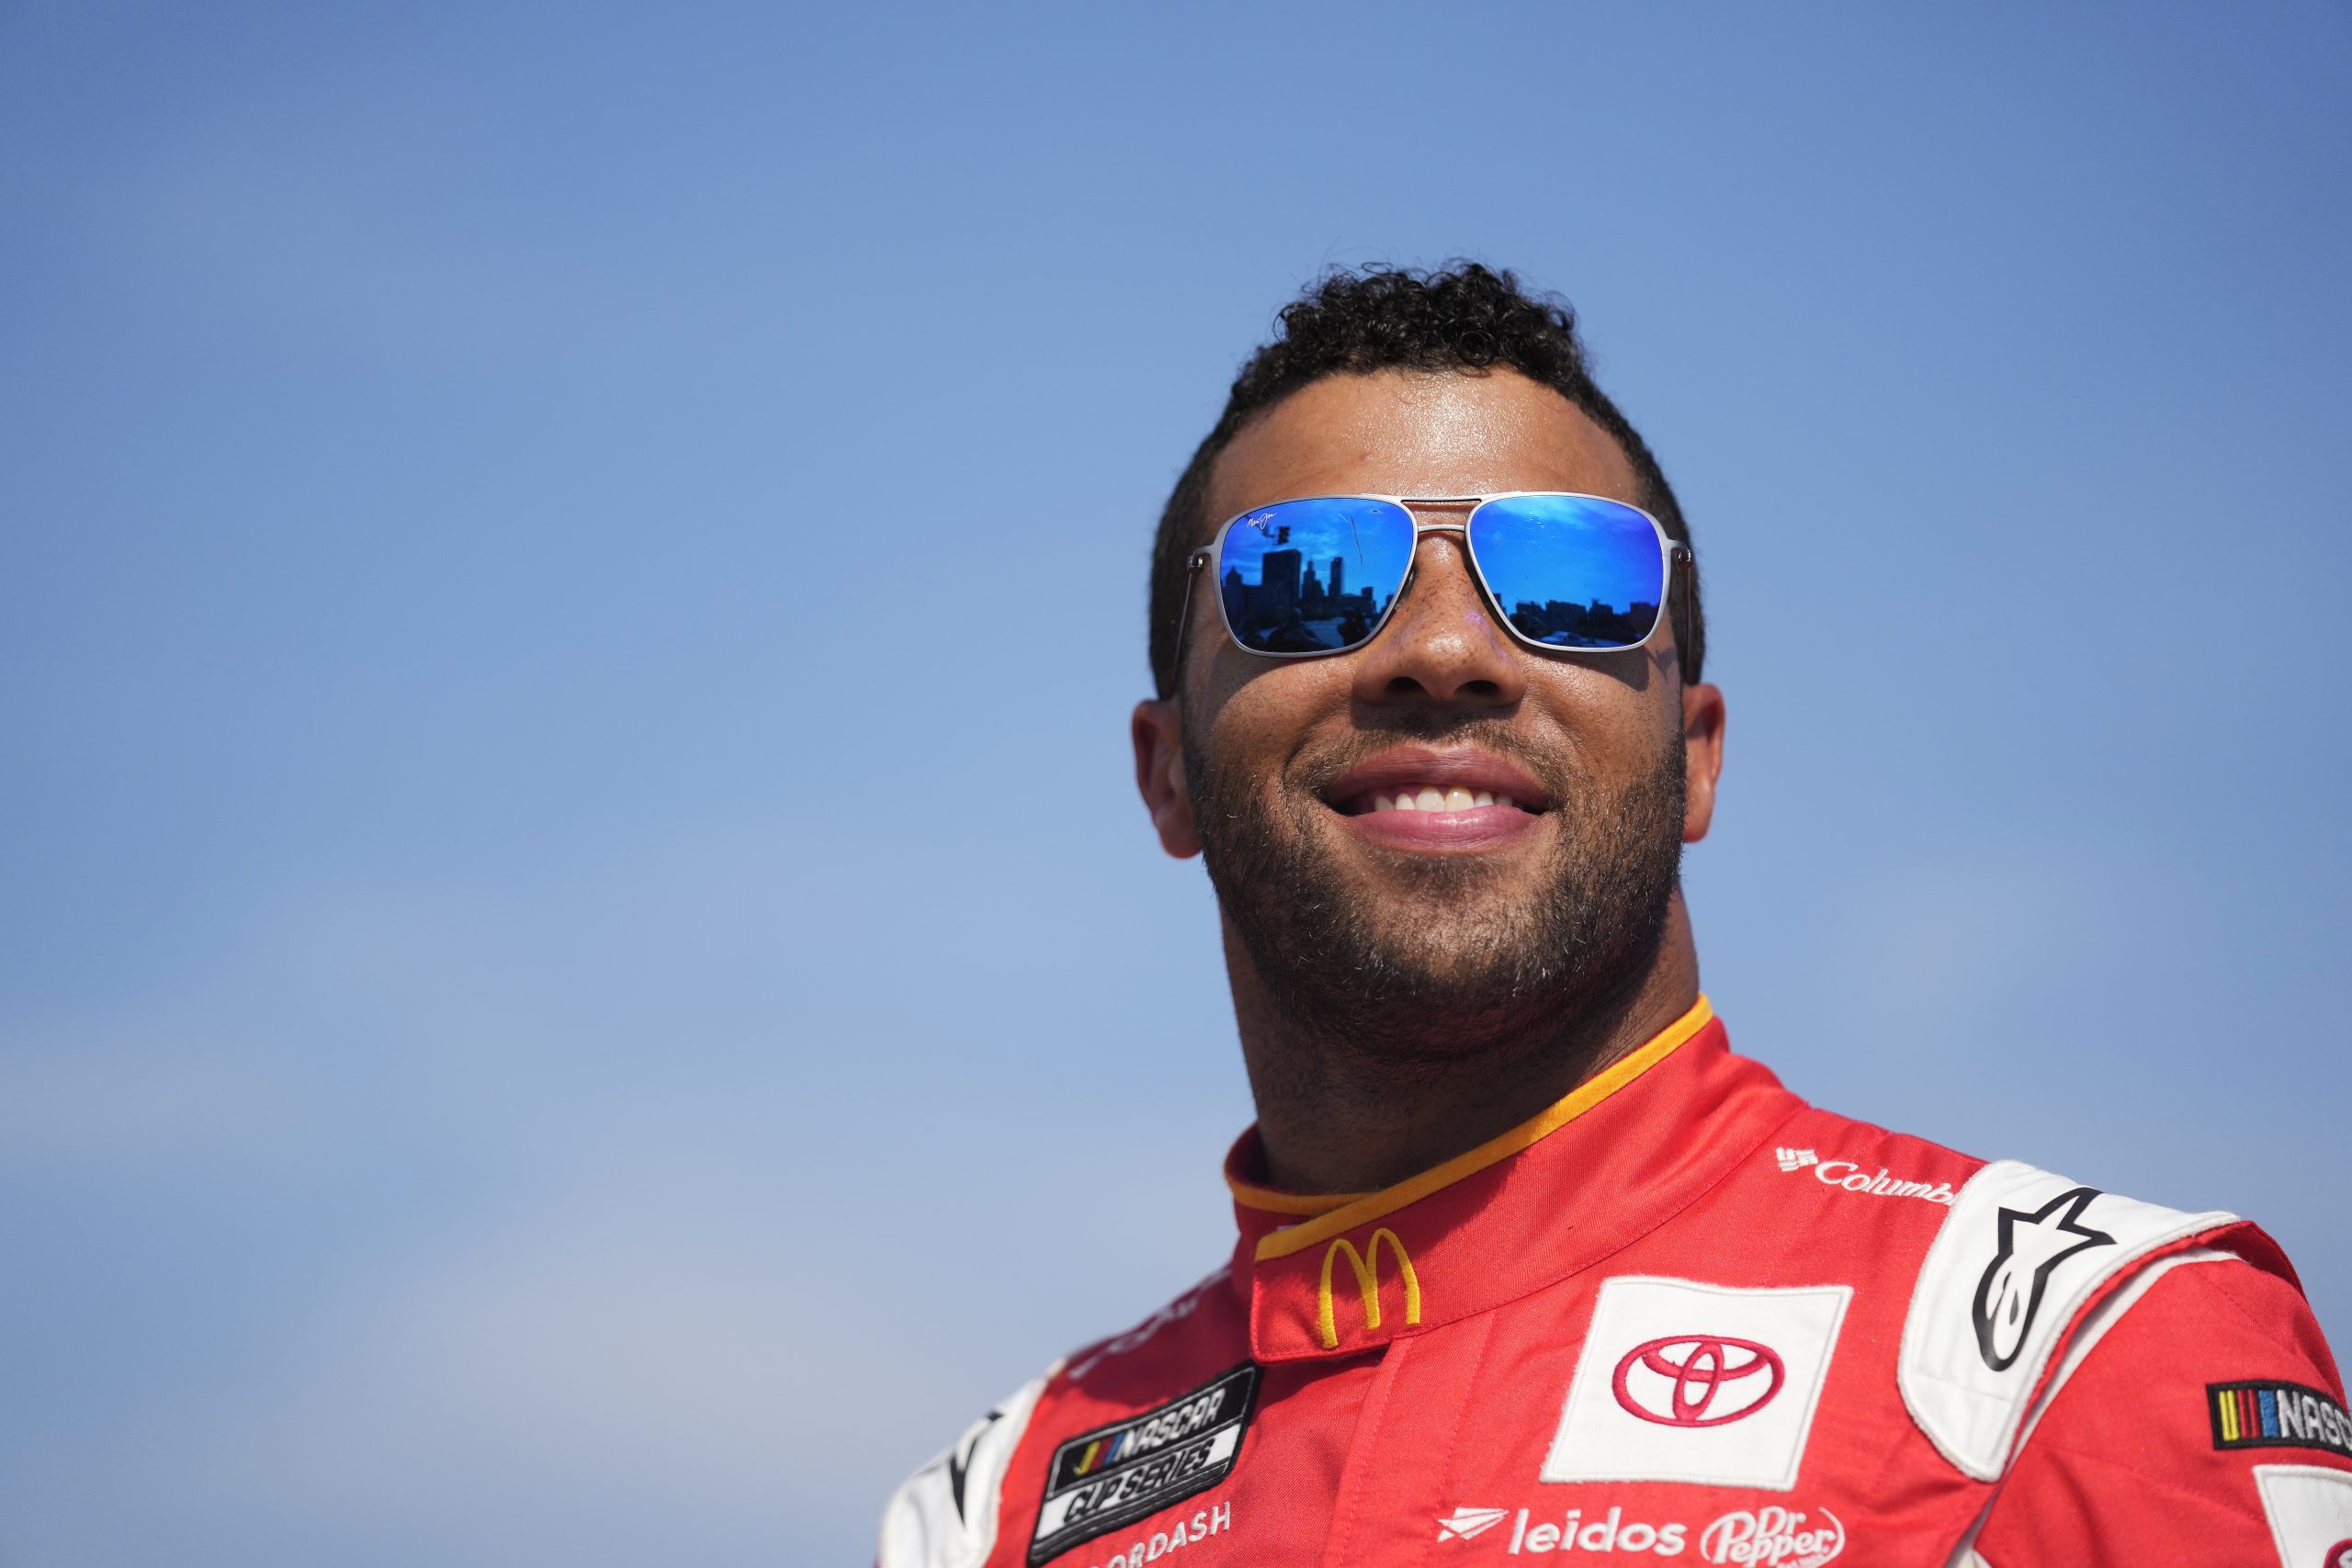 CHICAGO, ILLINOIS - JULY 19: Bubba Wallace poses for a photo near Buckingham Fountain in promotion of the NASCAR Chicago Street Race announcement on July 19, 2022 in Chicago, Illinois. (Photo by Patrick McDermott/Getty Images)